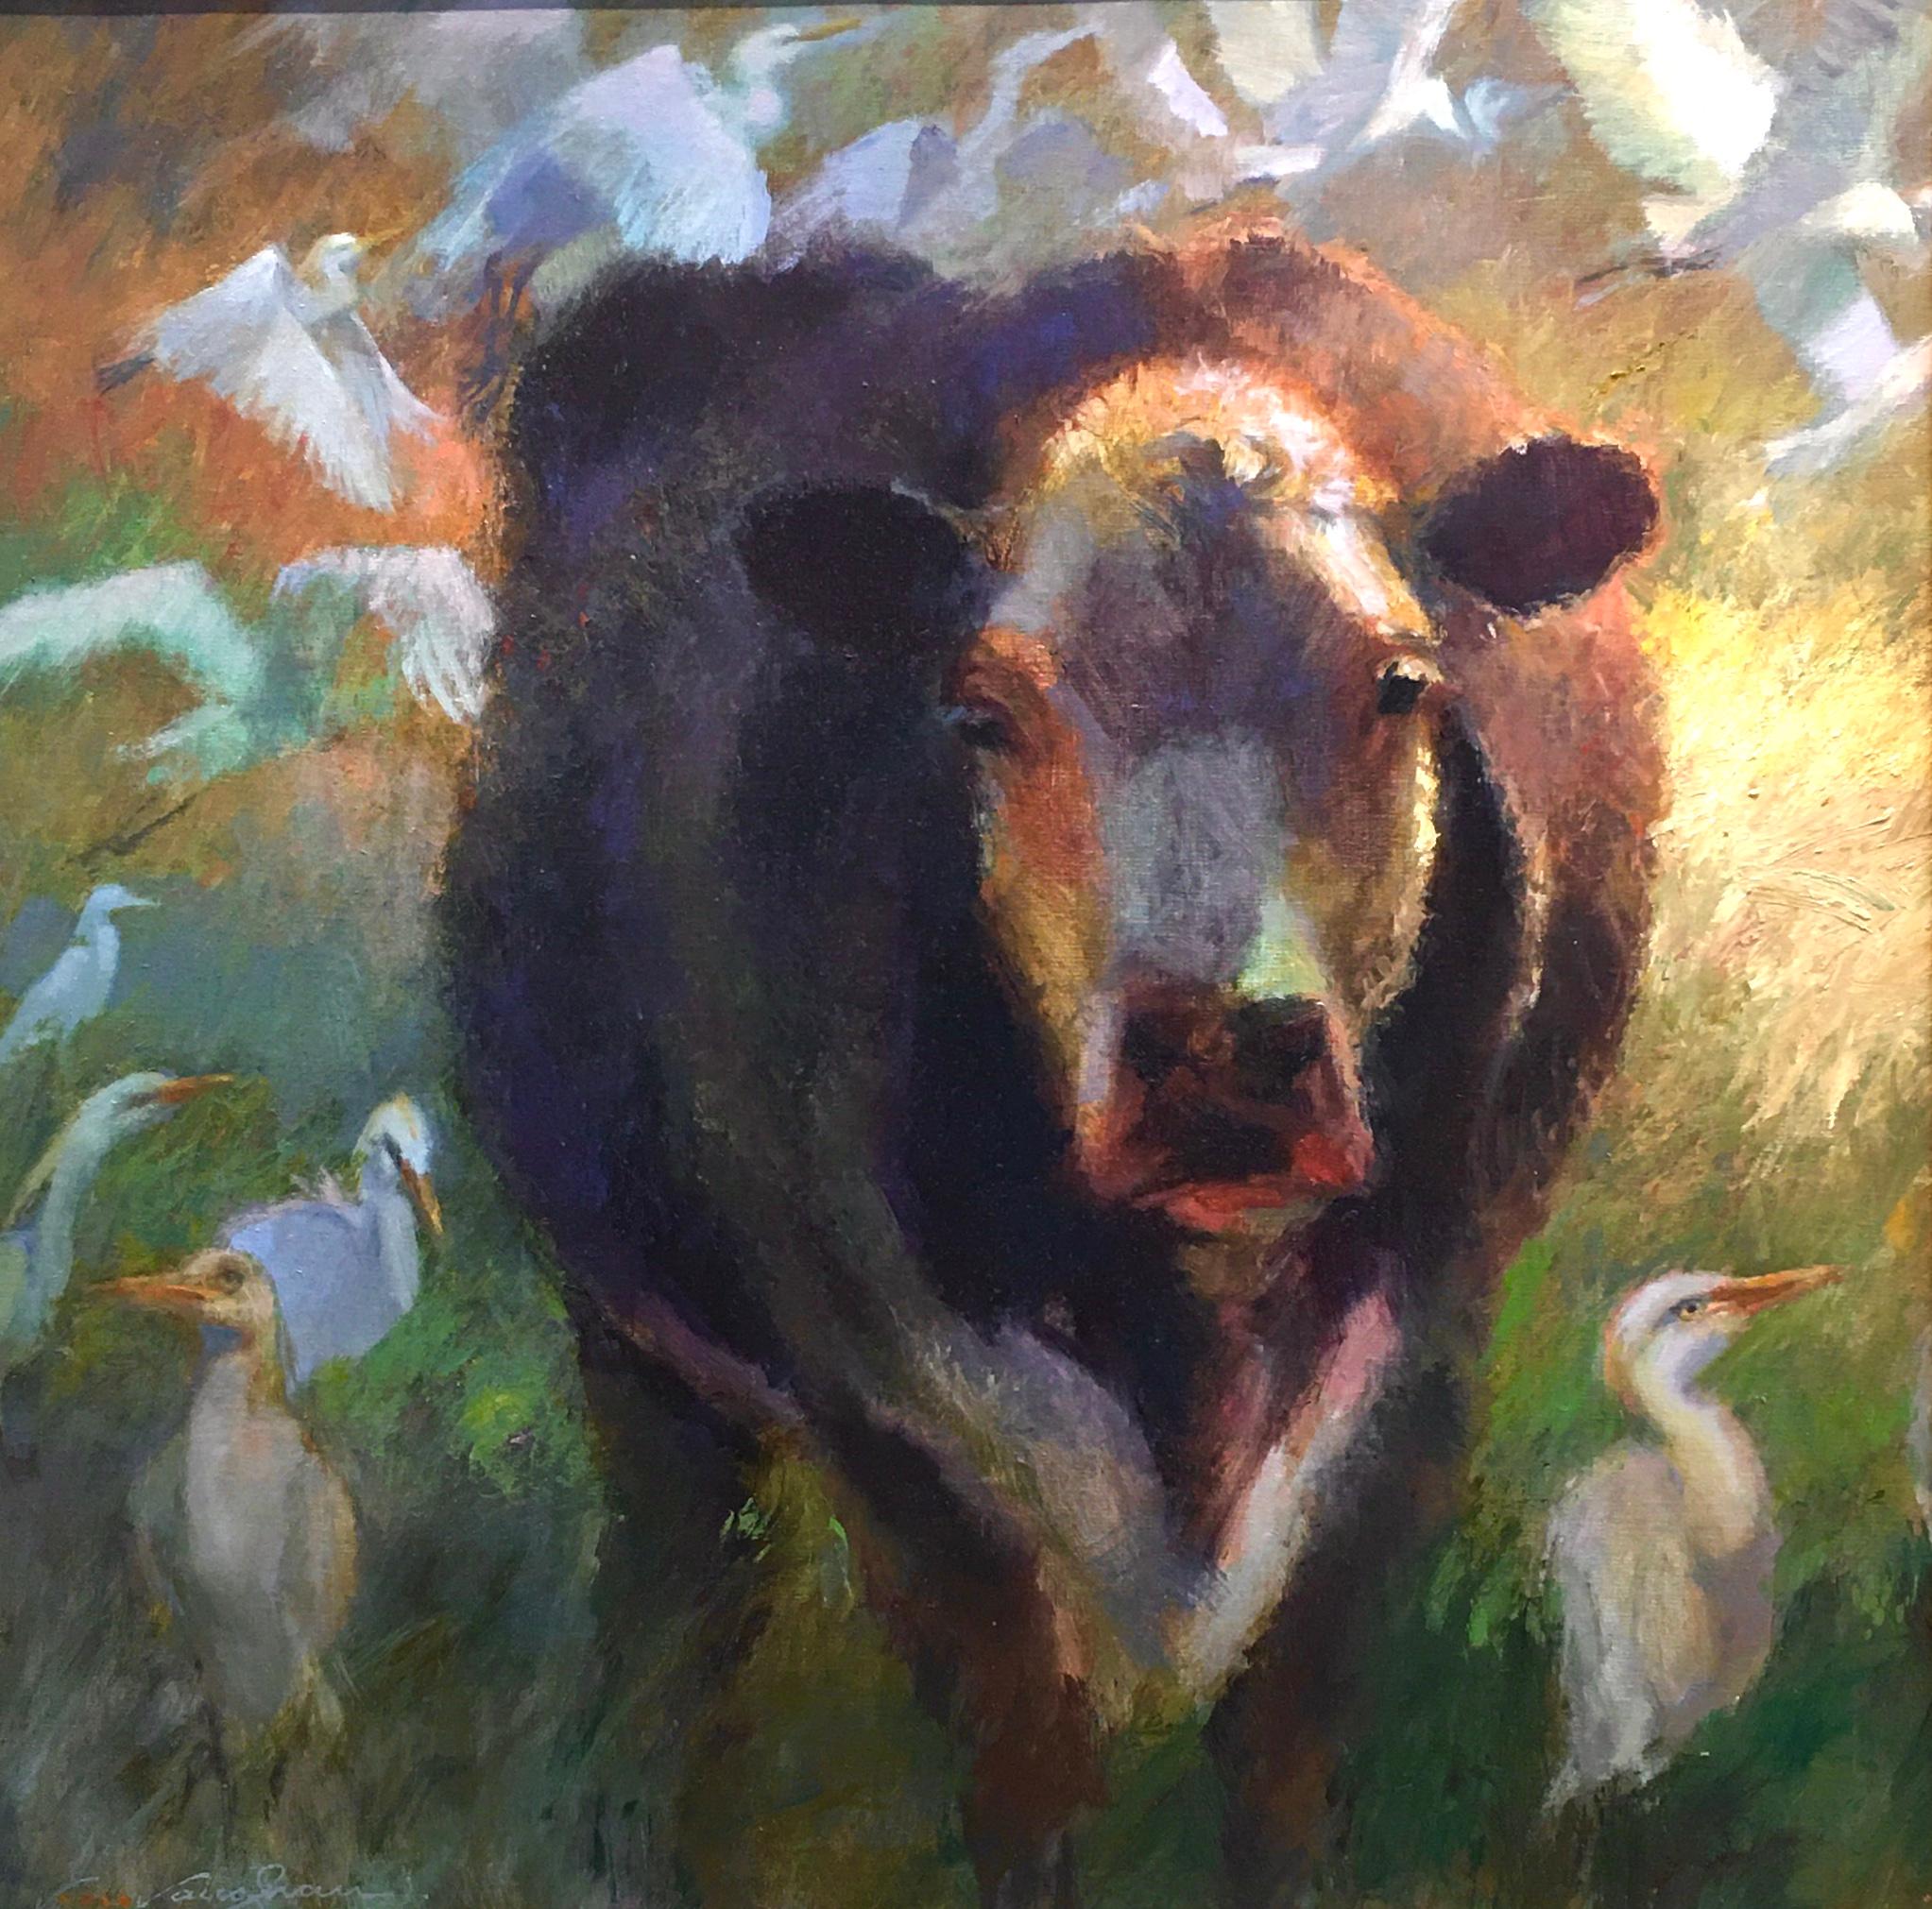 LOOK FOR FREE SHIPPING AT CHECKOUT
 With Few Egrets shows the cattle on a Texas ranch. This was painted from a plein aire painting done on a ranch in South Texas near the Mexican border.  It has an Impressionistic Style as seen in many of Virginia